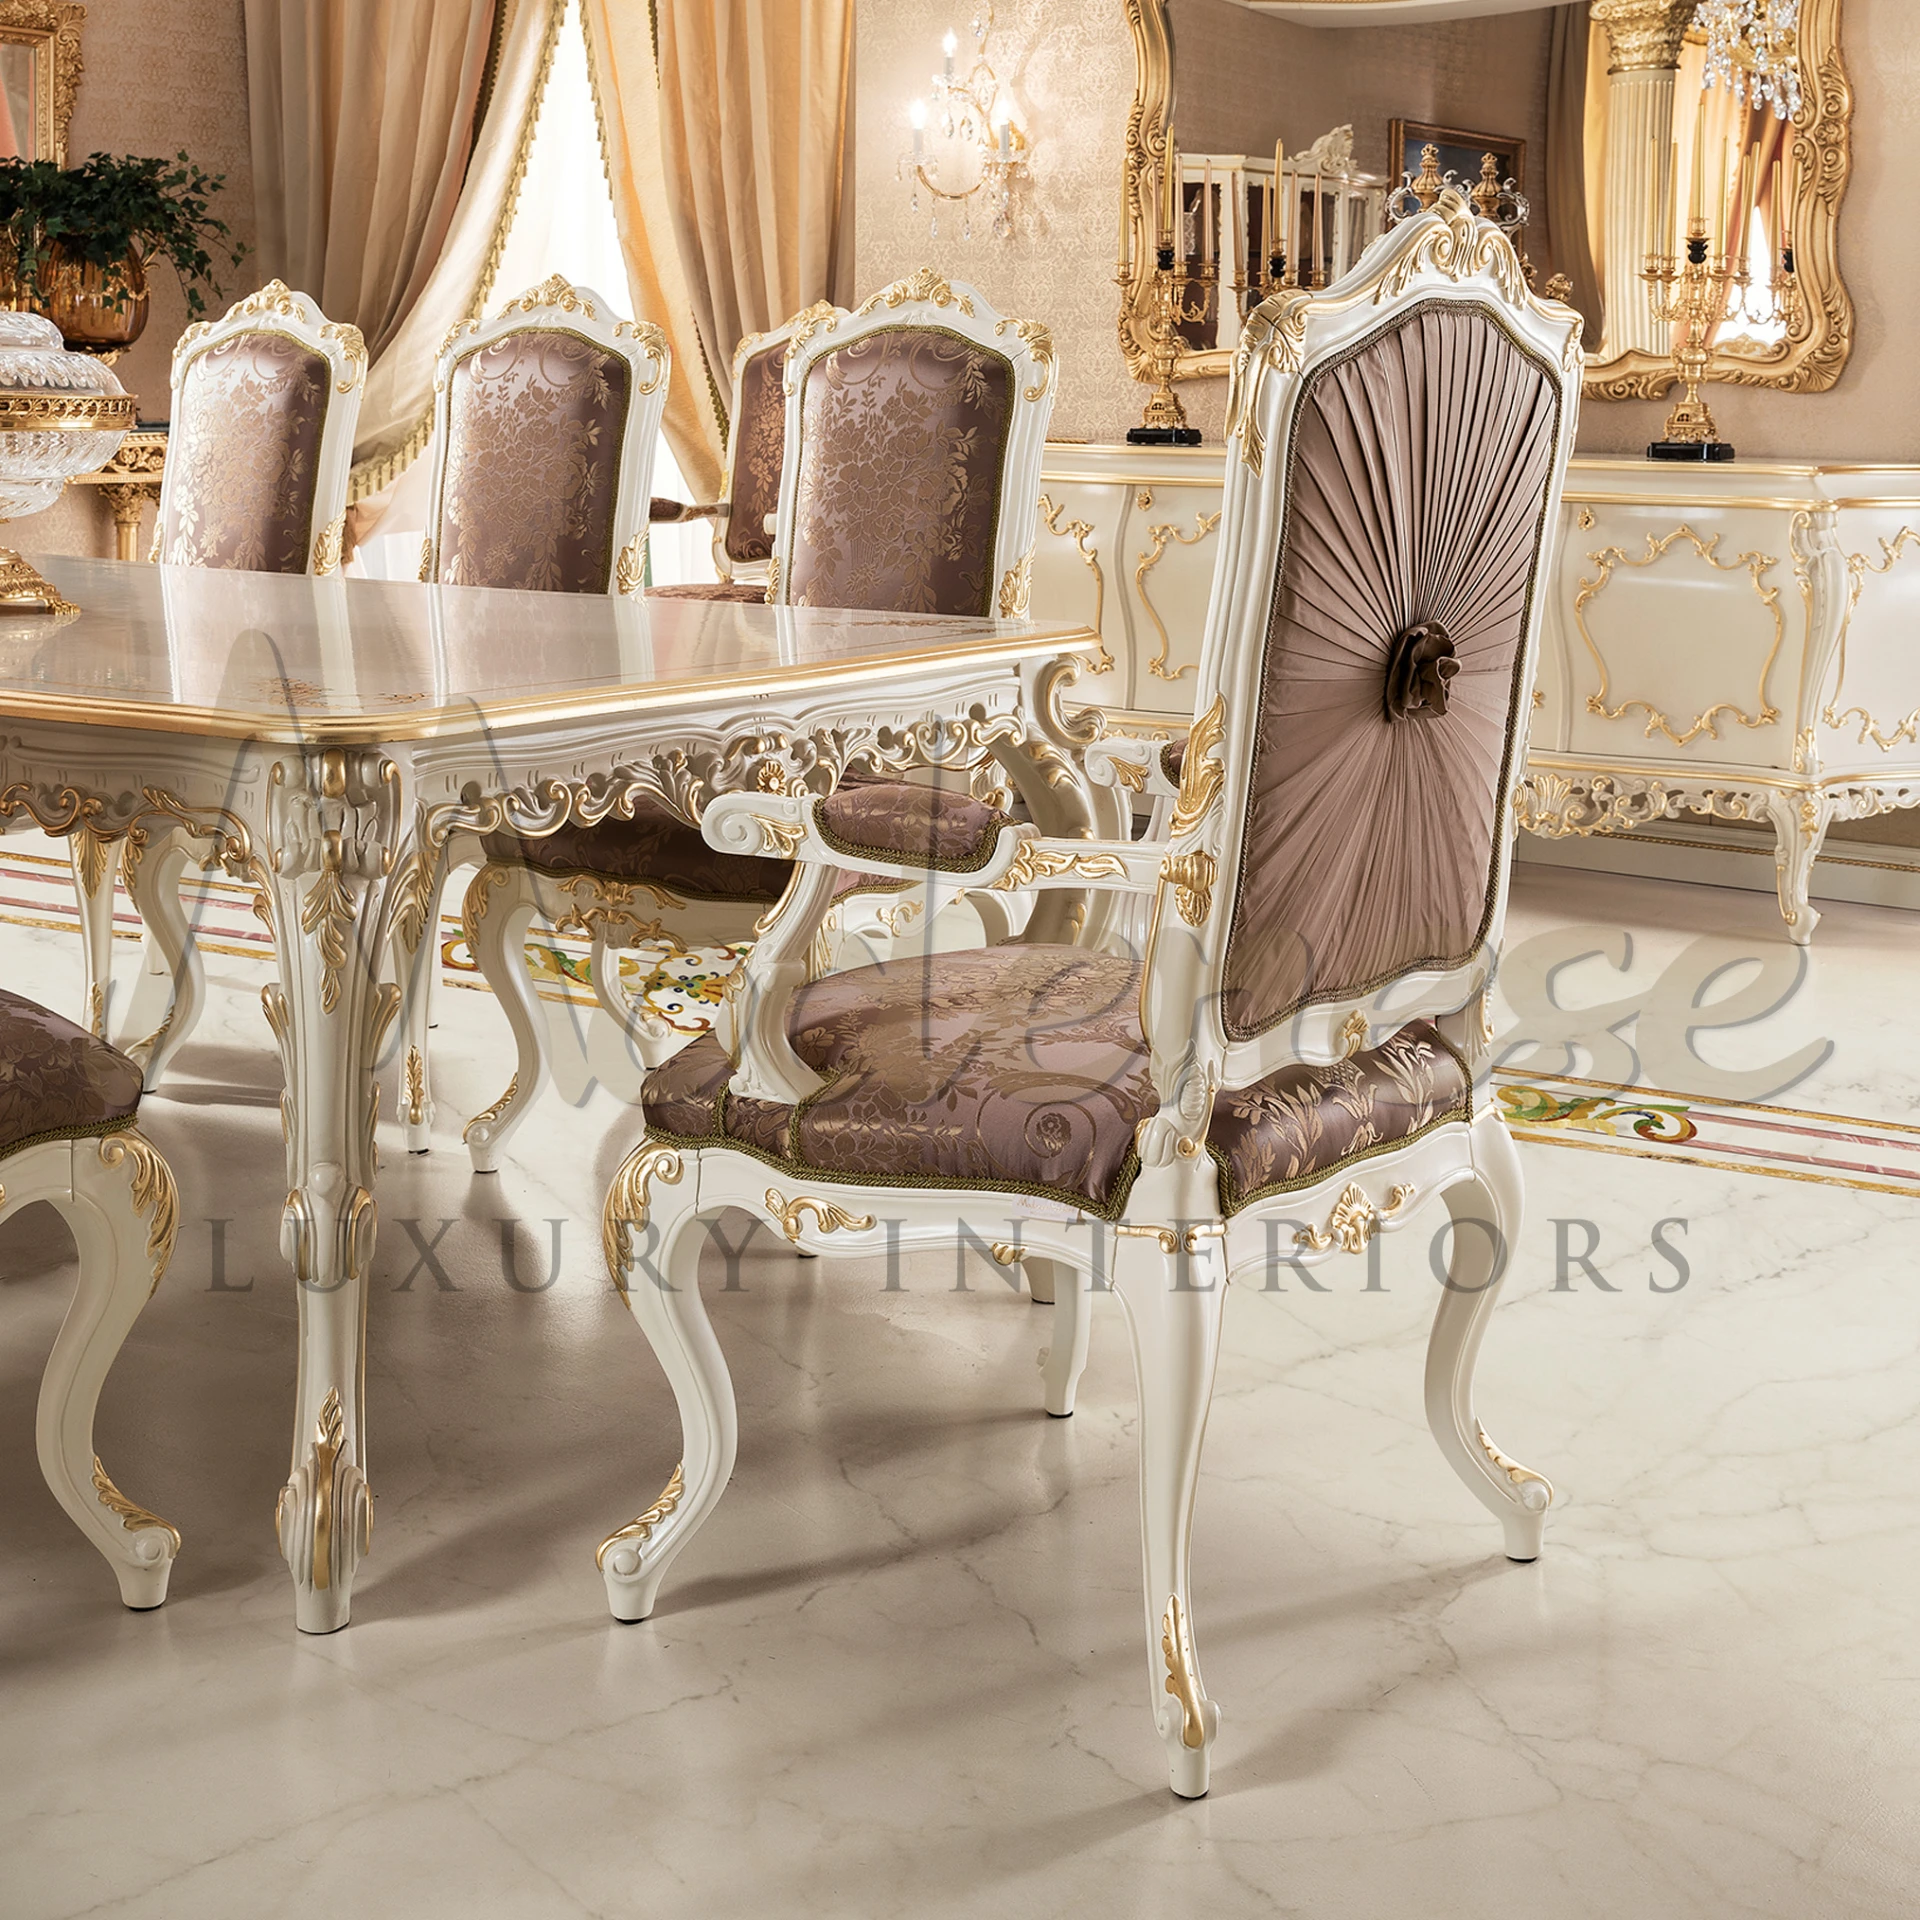 Indulge in luxury with Modenese Furniture's dining featuring baroque legs, light purple upholstery, and exquisite gold leaf appliques on ivory lacquer finish.